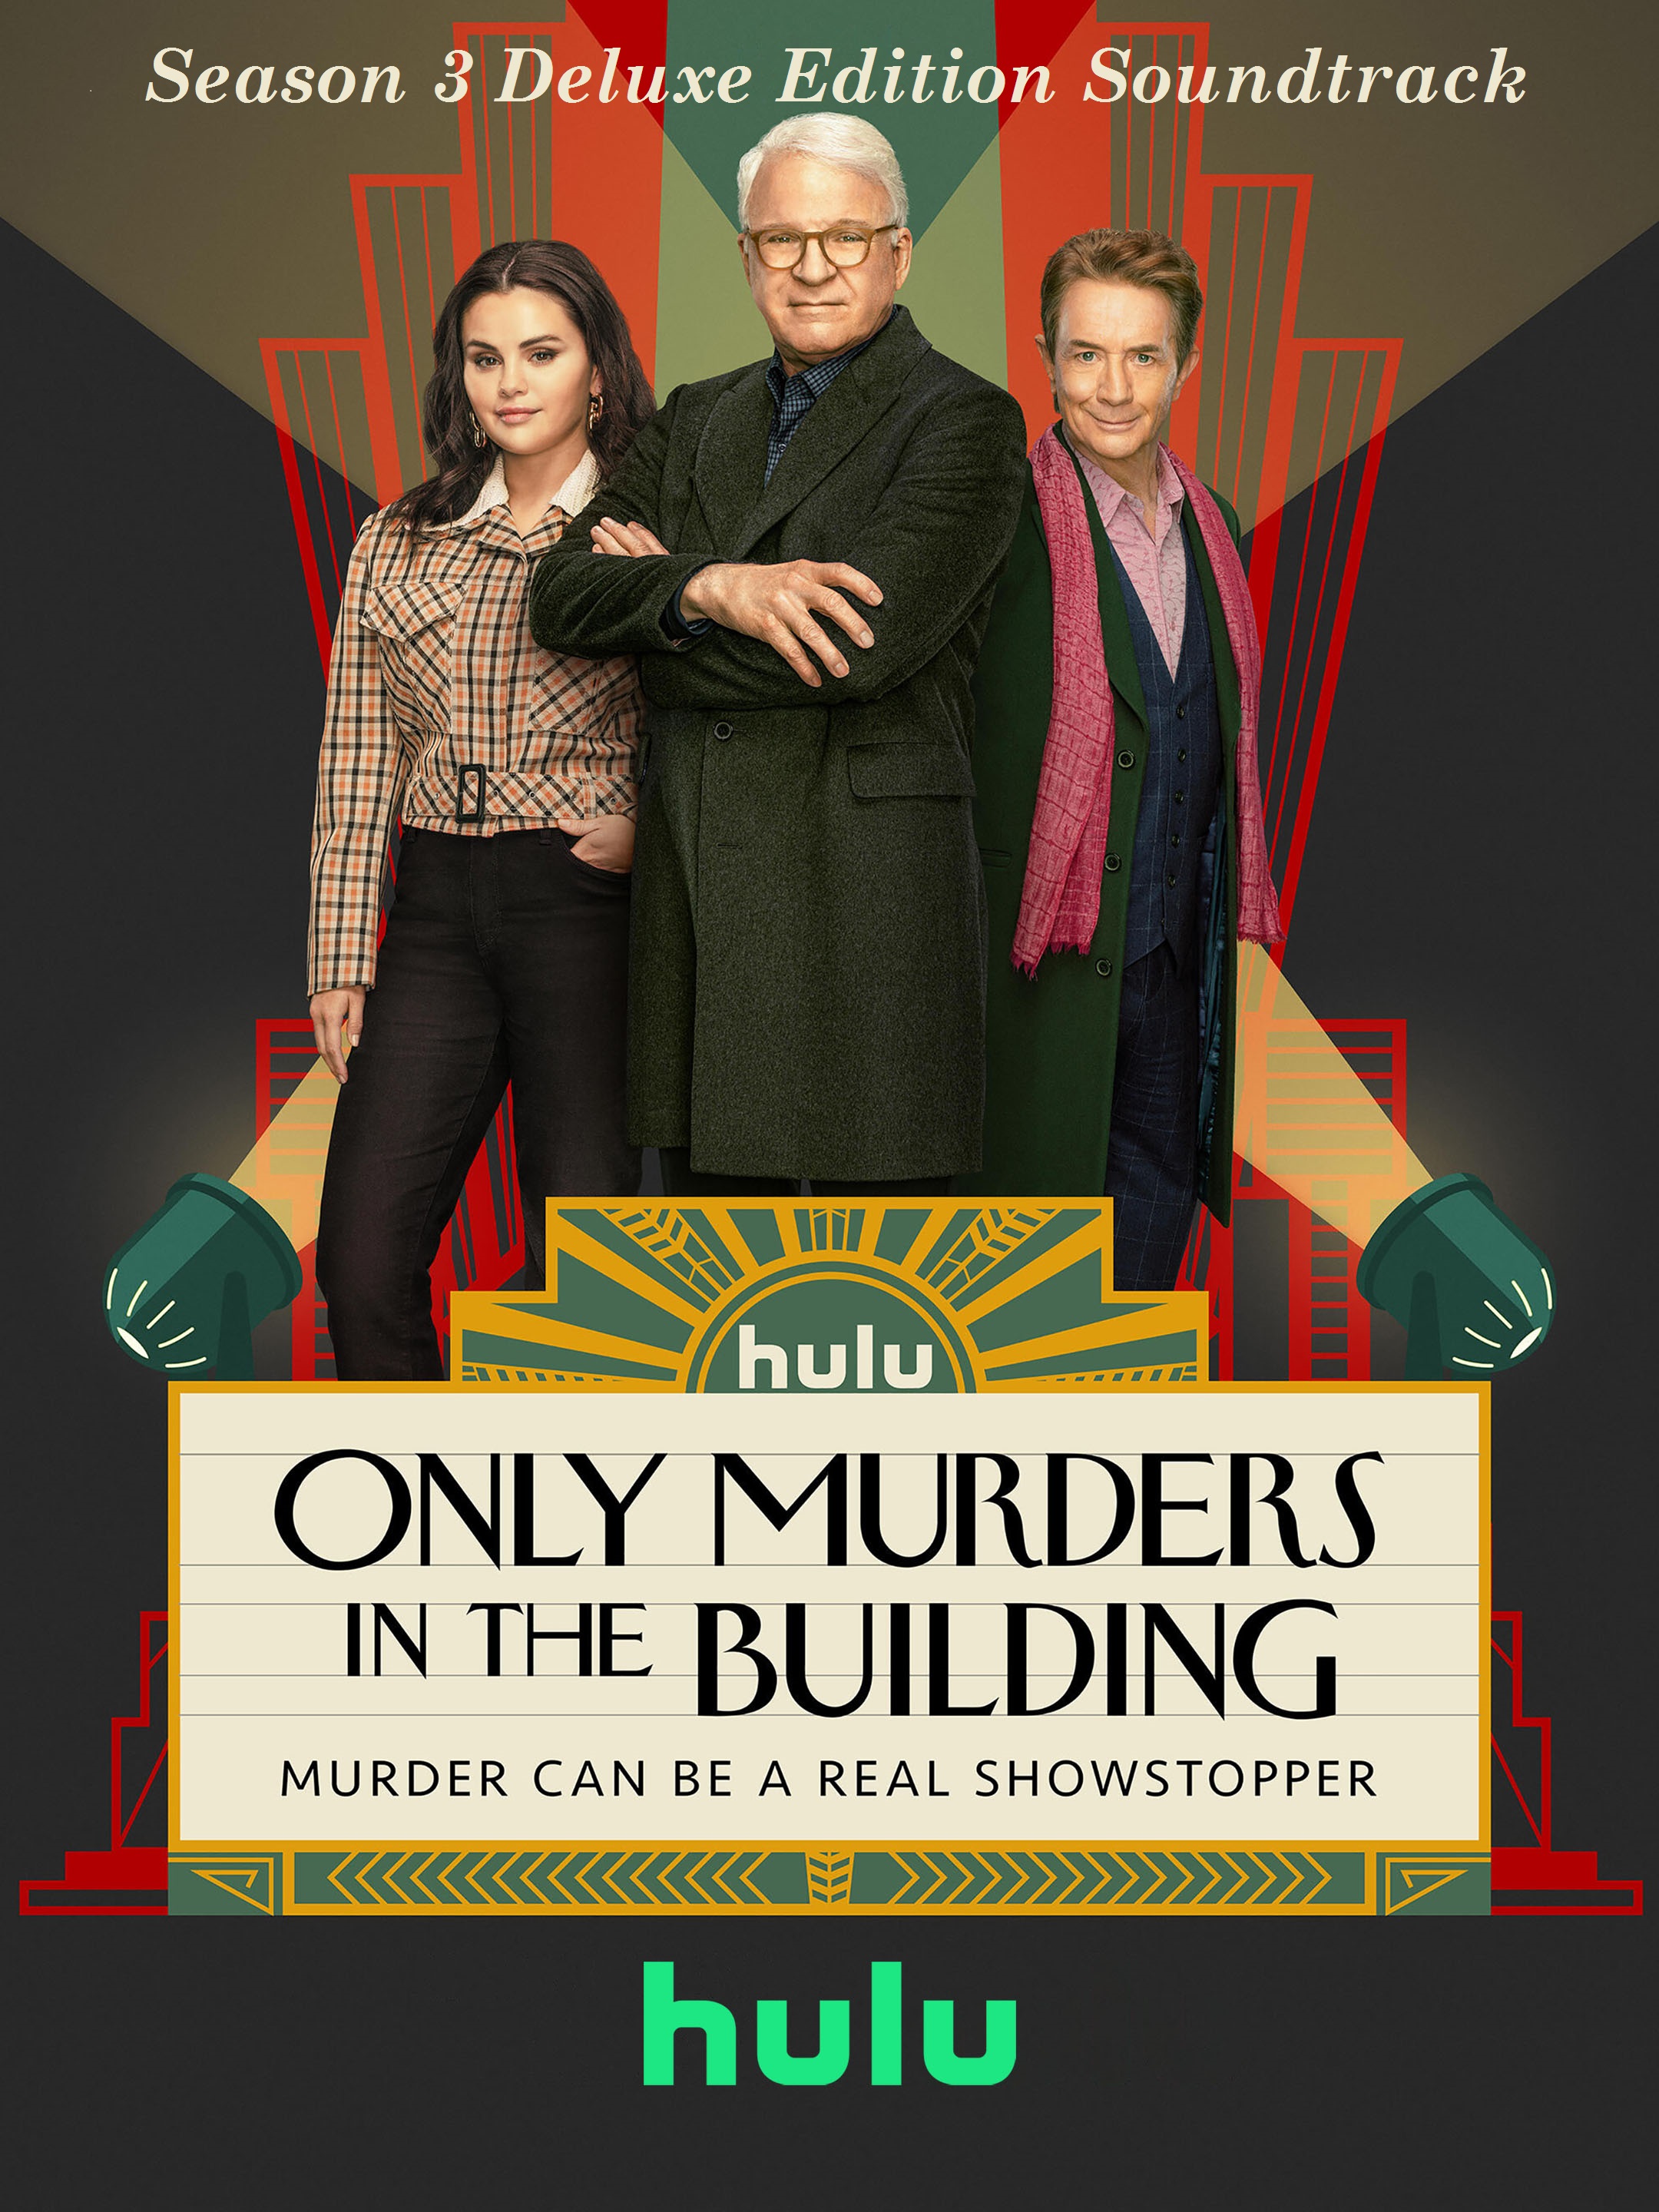 Only Murders in the Building Season 3 Deluxe Edition